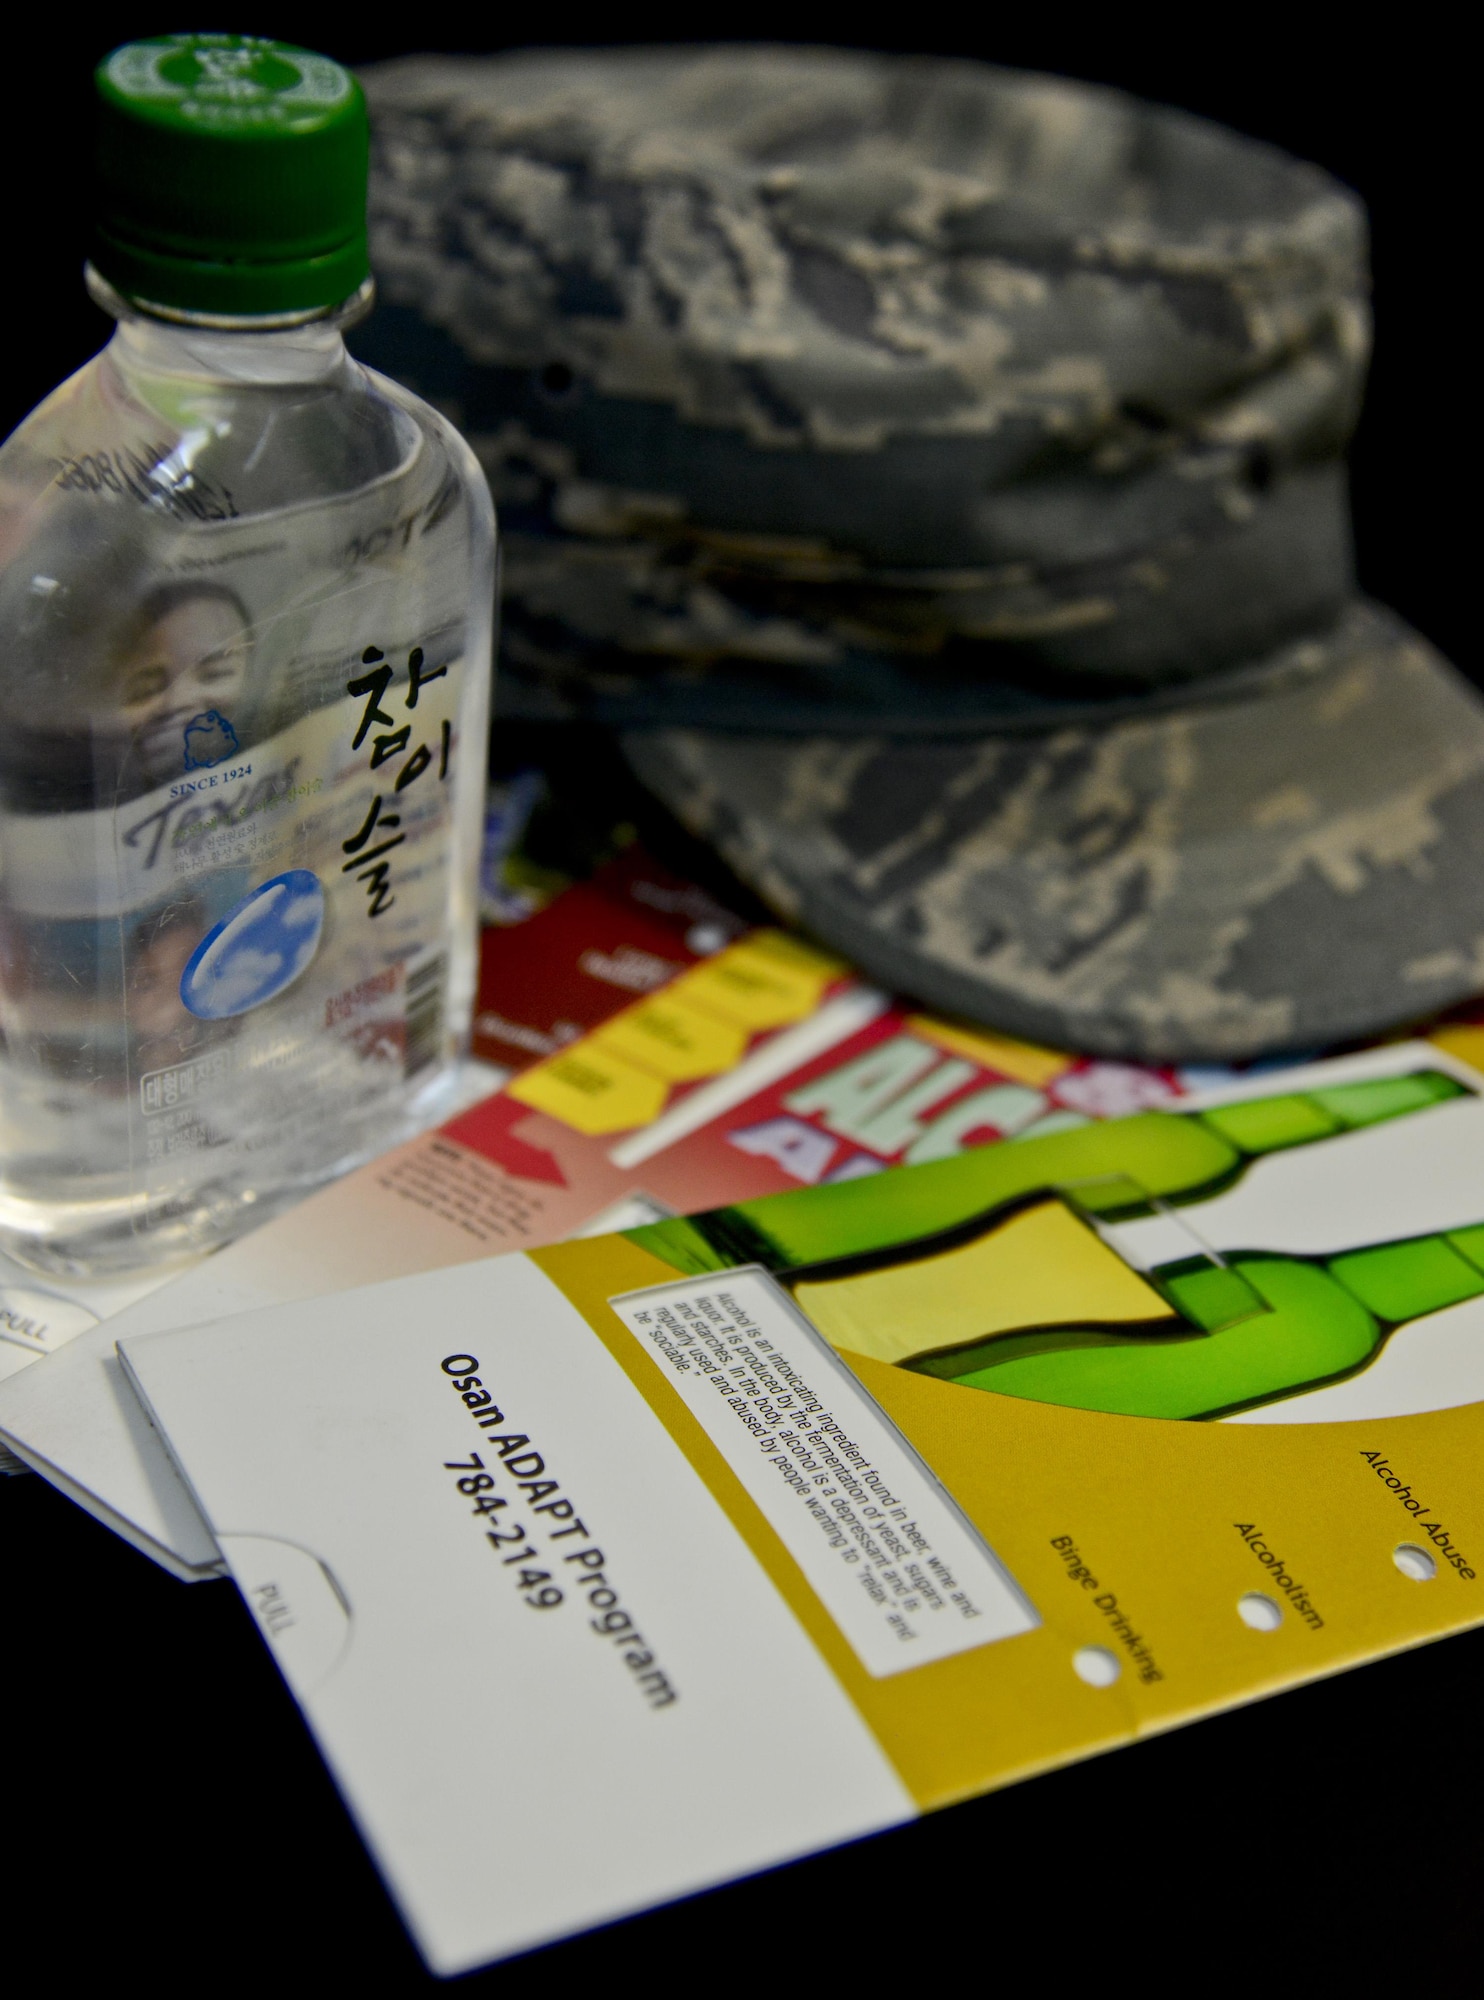 Osan Air Base has the highest amount of referrals to the Alcohol and Drug Abuse Prevention and Treatment program across the entire Air Force, according to Maj. Relinda Hatcher, 51st Medical Operation Squadron ADAPT Program manager. The ADAPT program here offers a variety of services to assist with substance abuse prevention, education and treatment. (U.S. Air Force photo by Senior Airman Kristin High/Released)